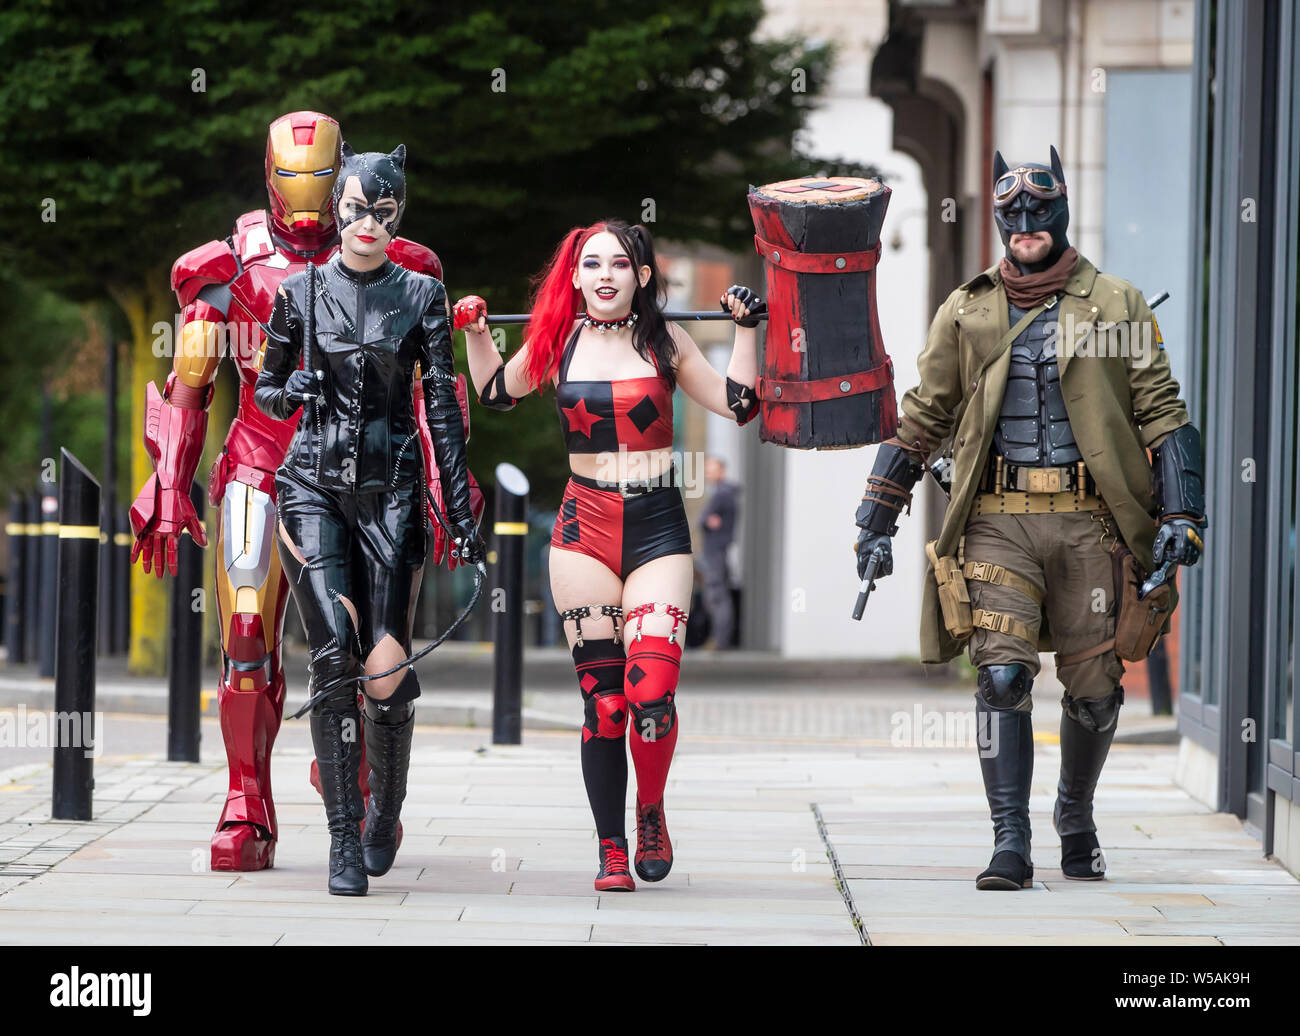 People dressed as characters (left to right) Iron Man, Cat woman, Harley Quinn from New 52 comics and Nightmare Batman during the MCM Manchester Comic Con which see thousands of sci-fi fans, gamers, comic collectors, movie buffs and anime enthusiasts visit Manchester Central. Stock Photo